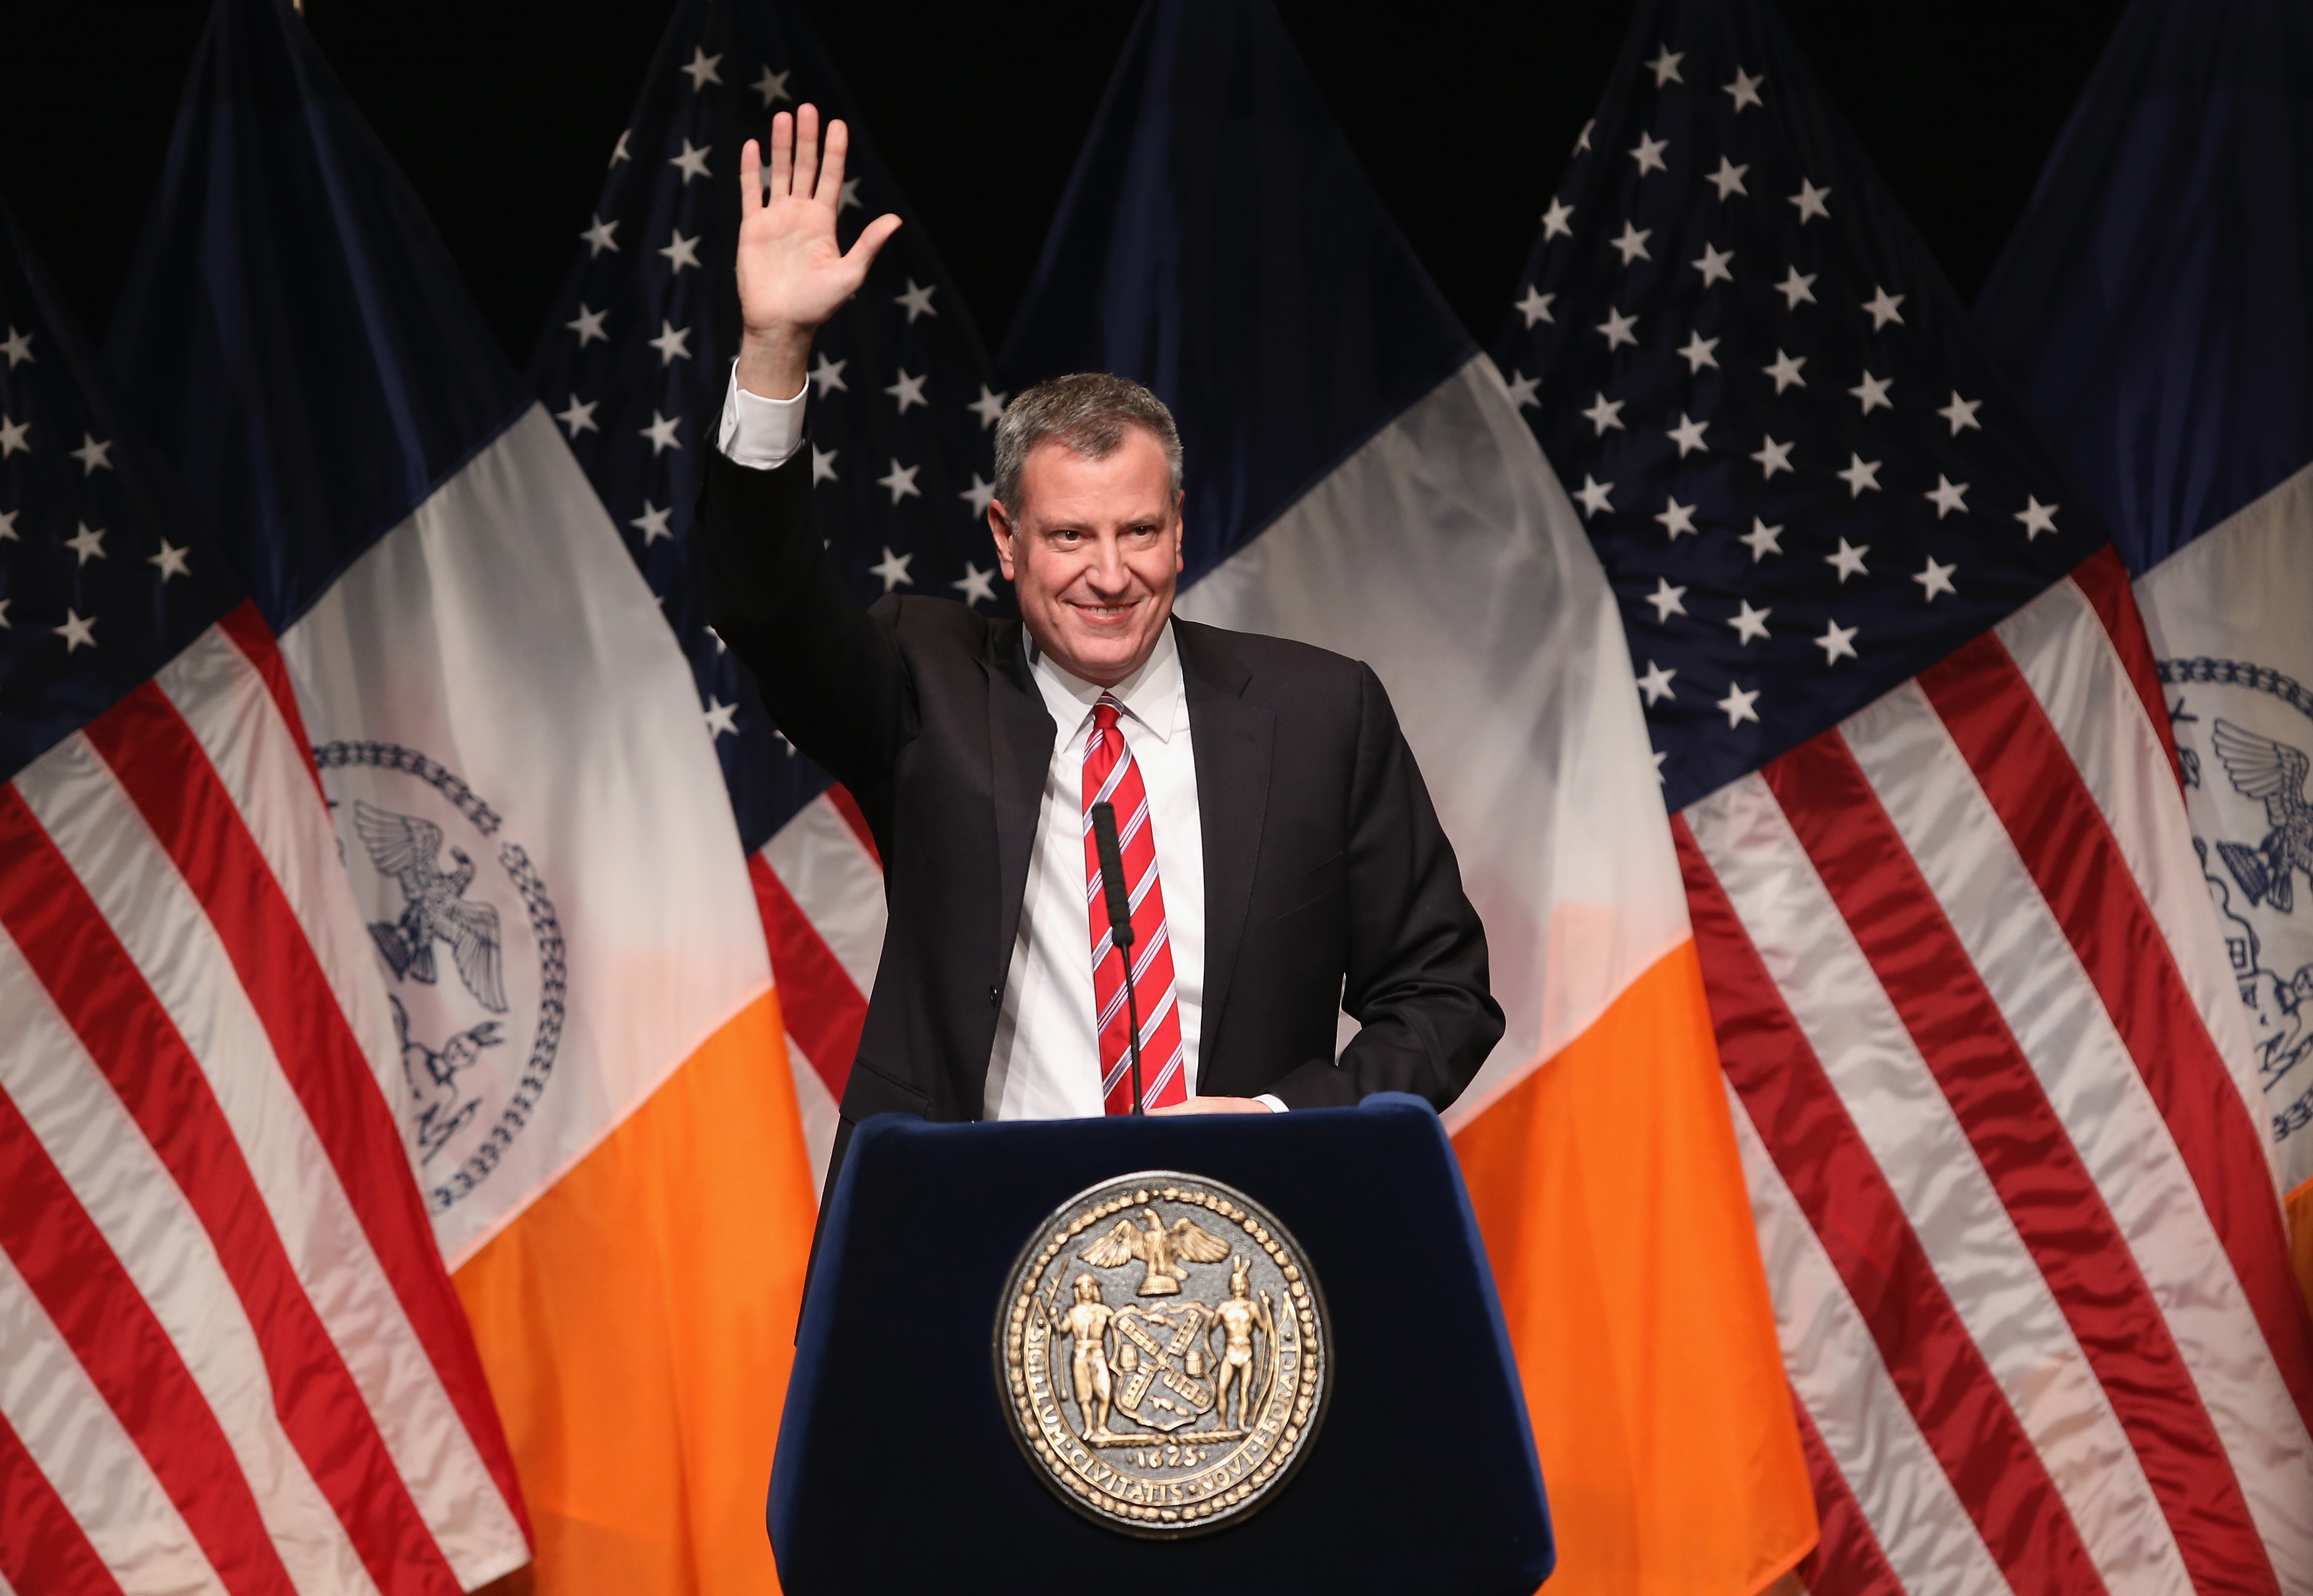 New York City Mayor Bill de Blasio gives the State of the City address at La Guardia Community College on Feb. 10, 2014. (John Moore—Getty Images) (John Moore—Getty Images)